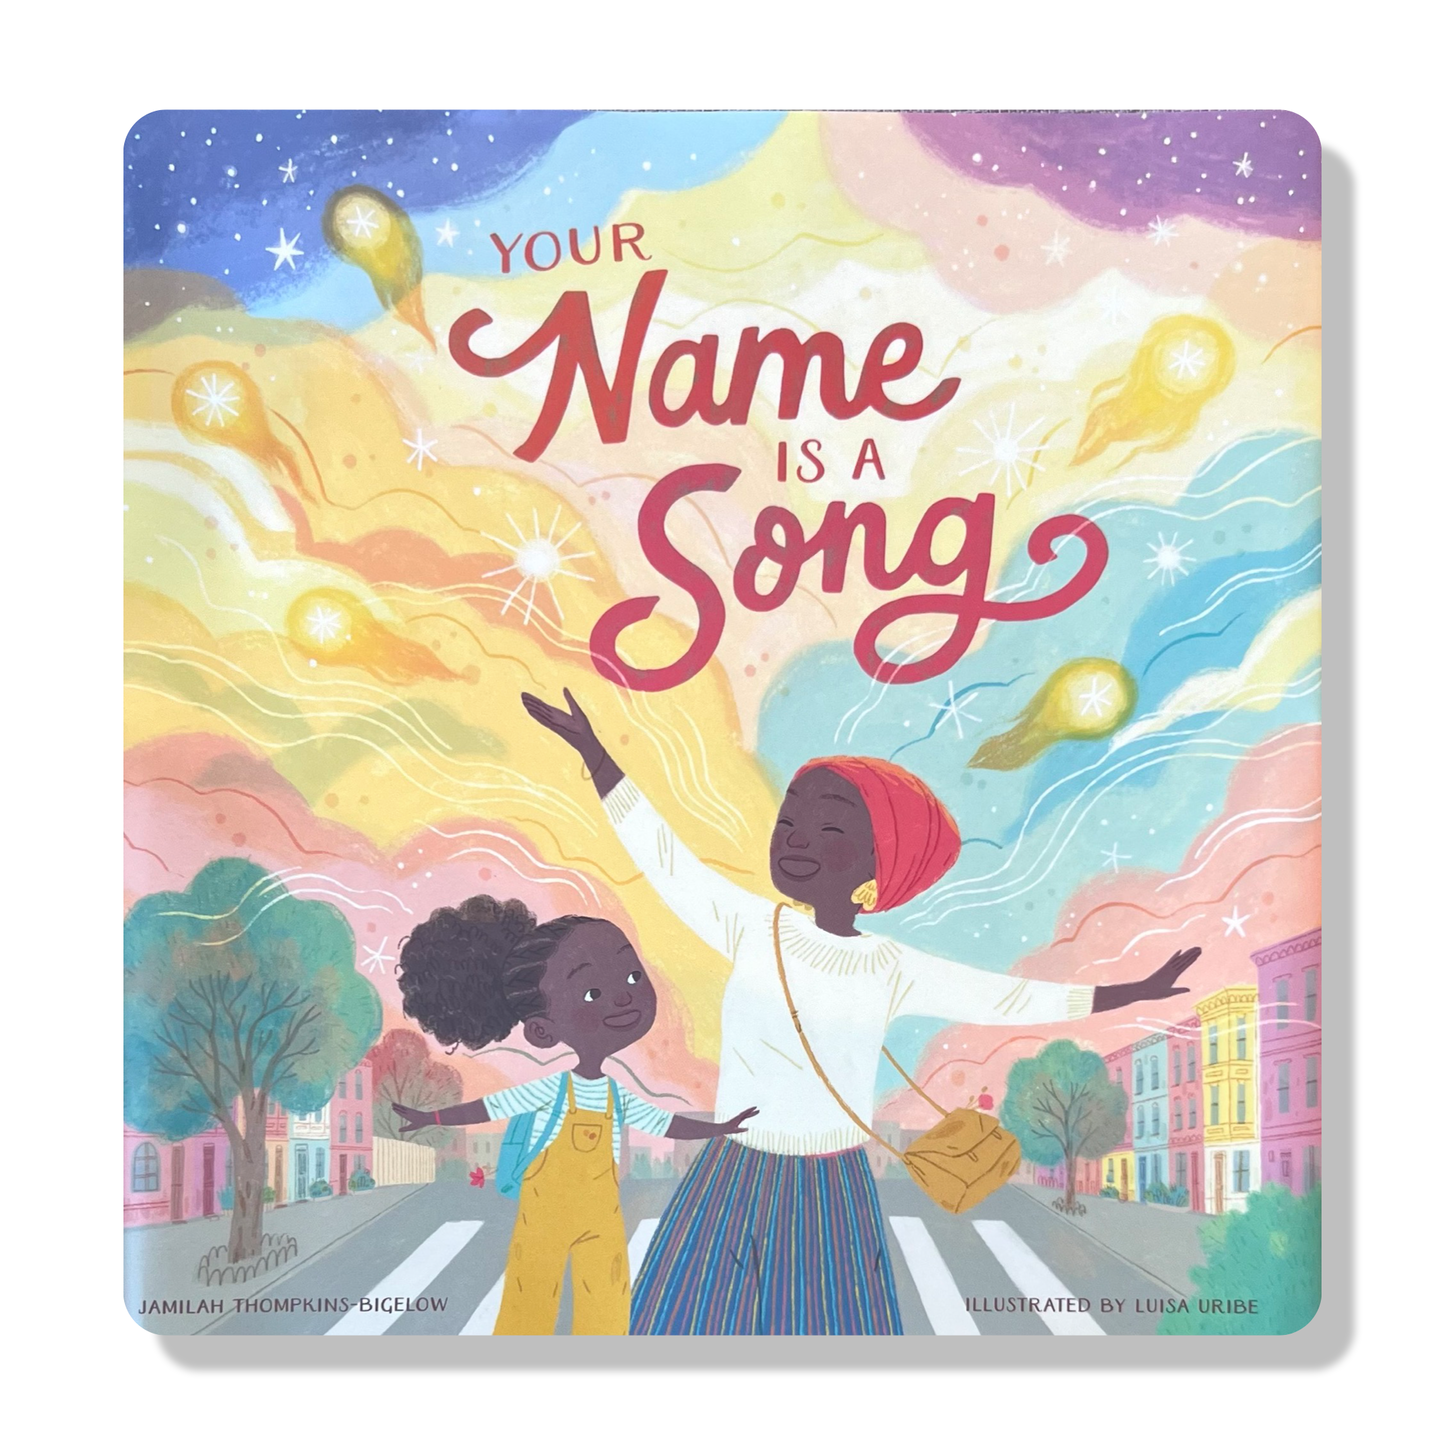 Your Name Is a Song